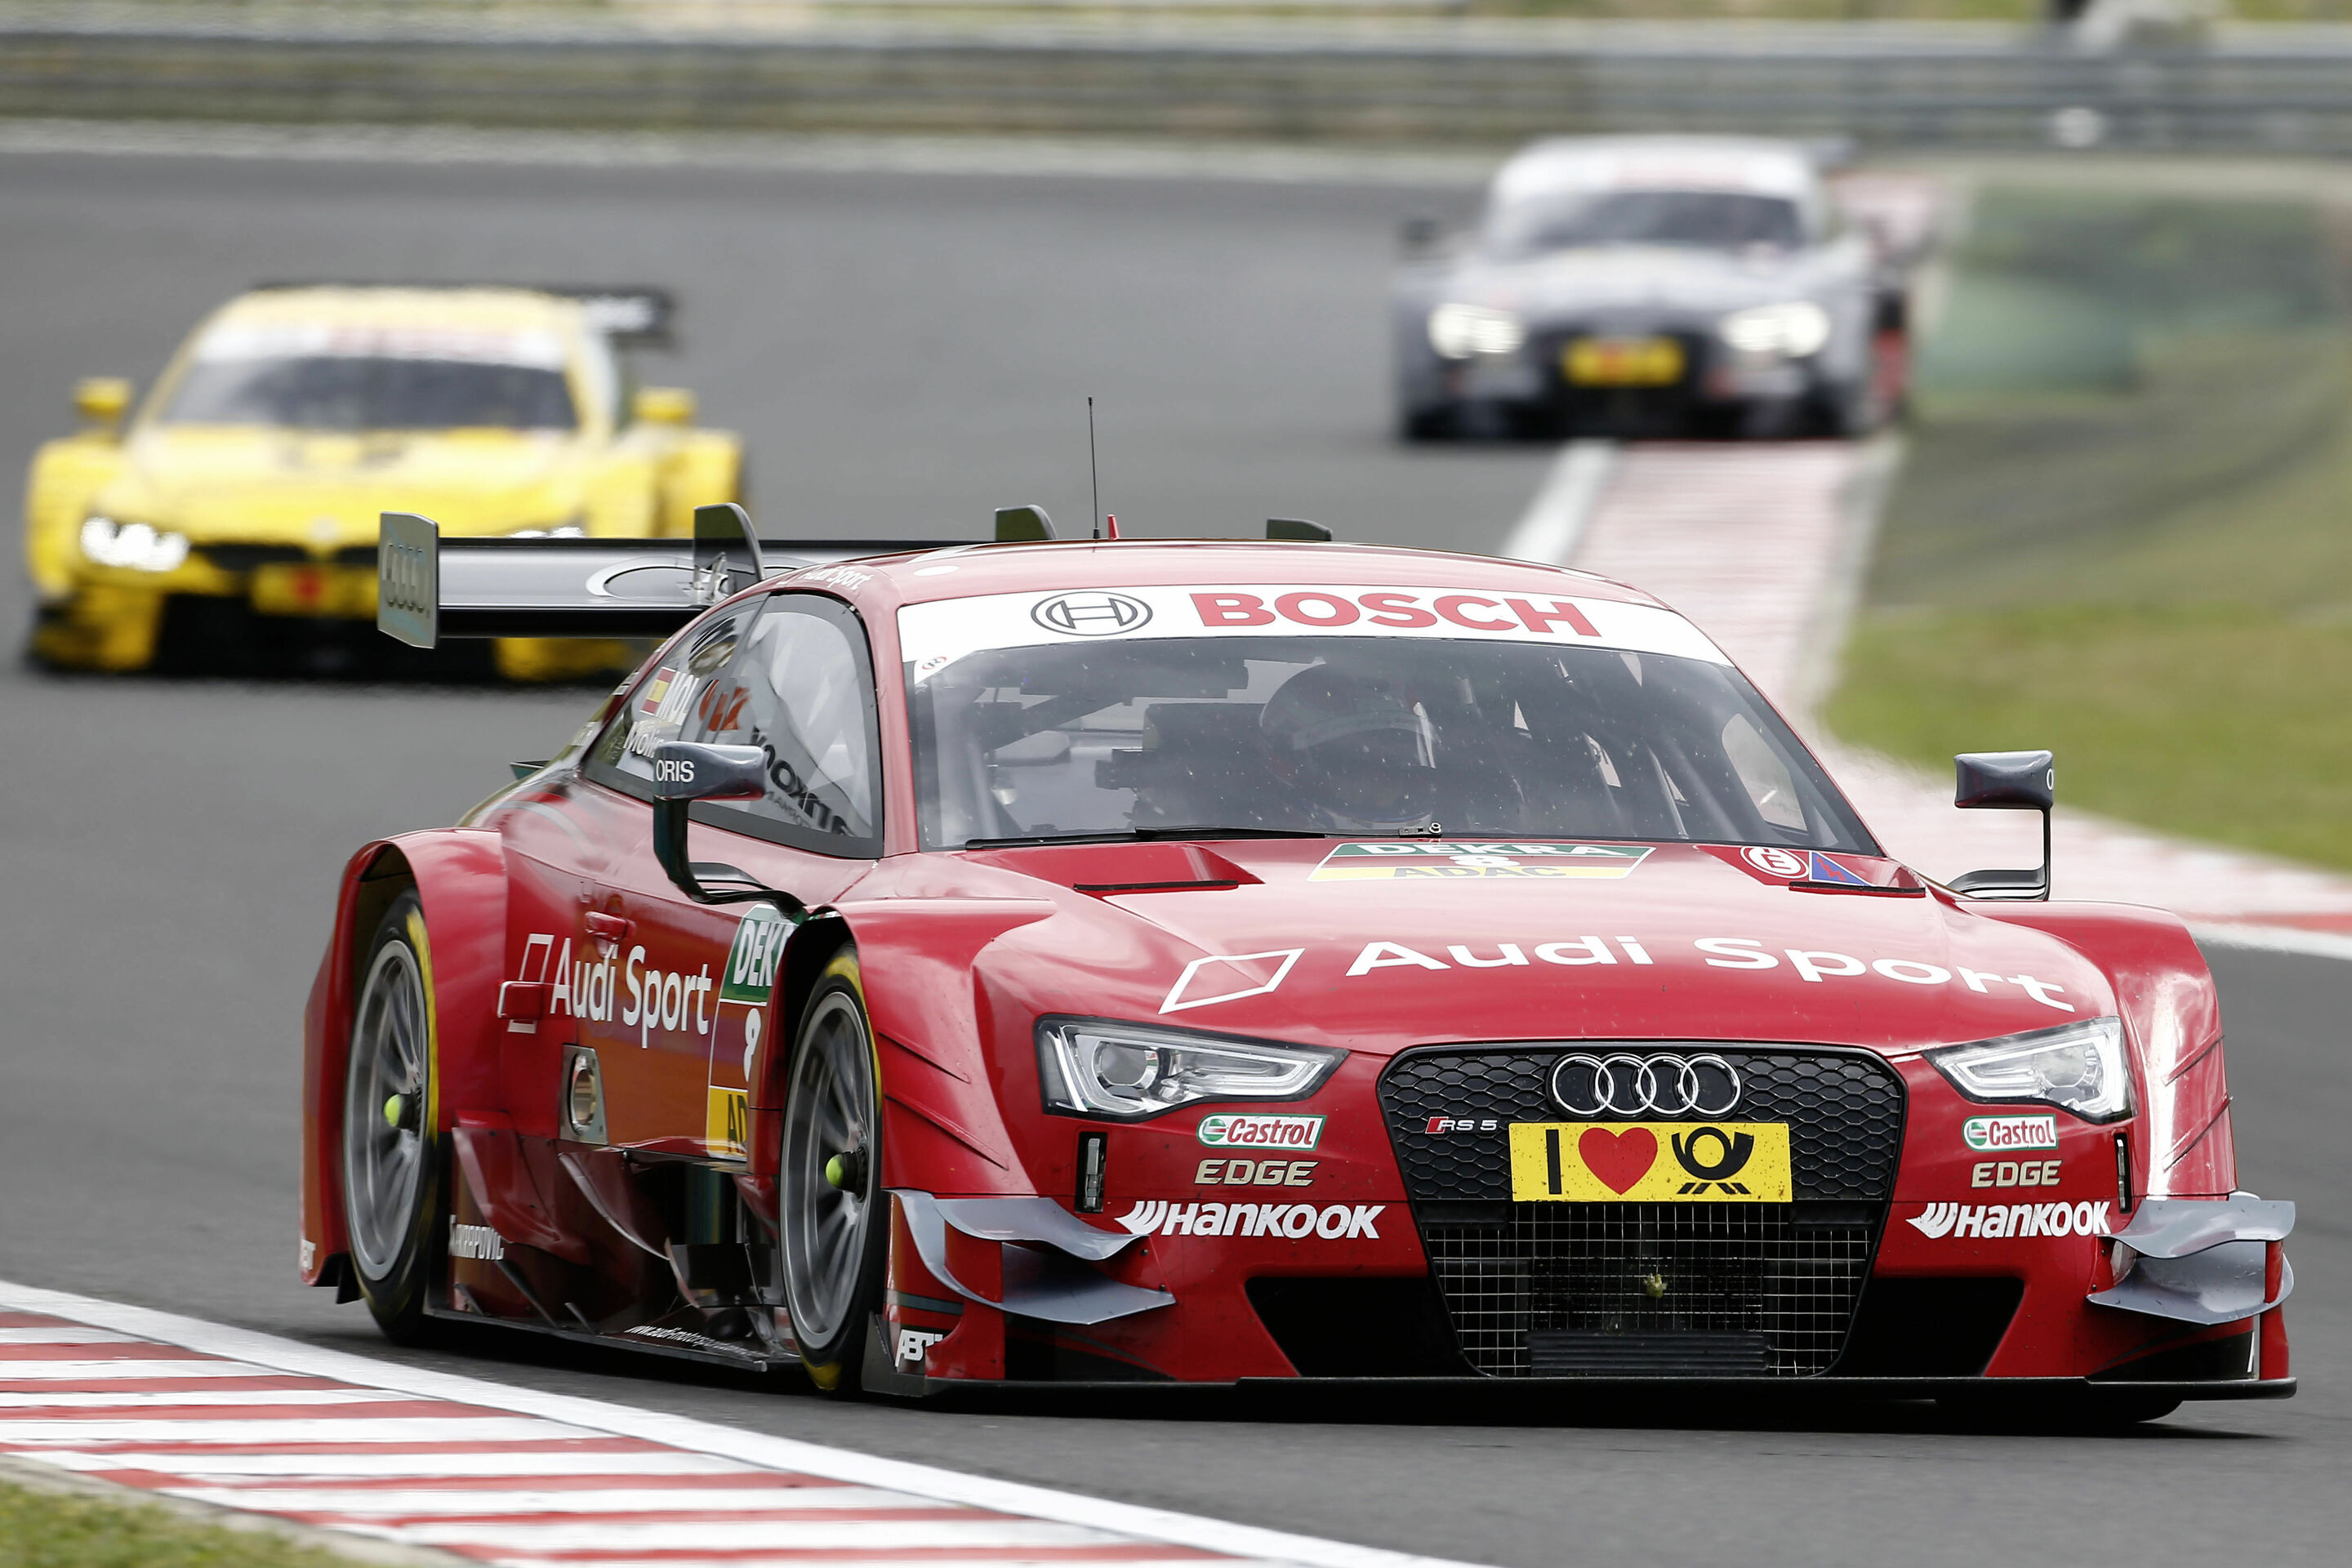 Molina shines for Audi in Hungary